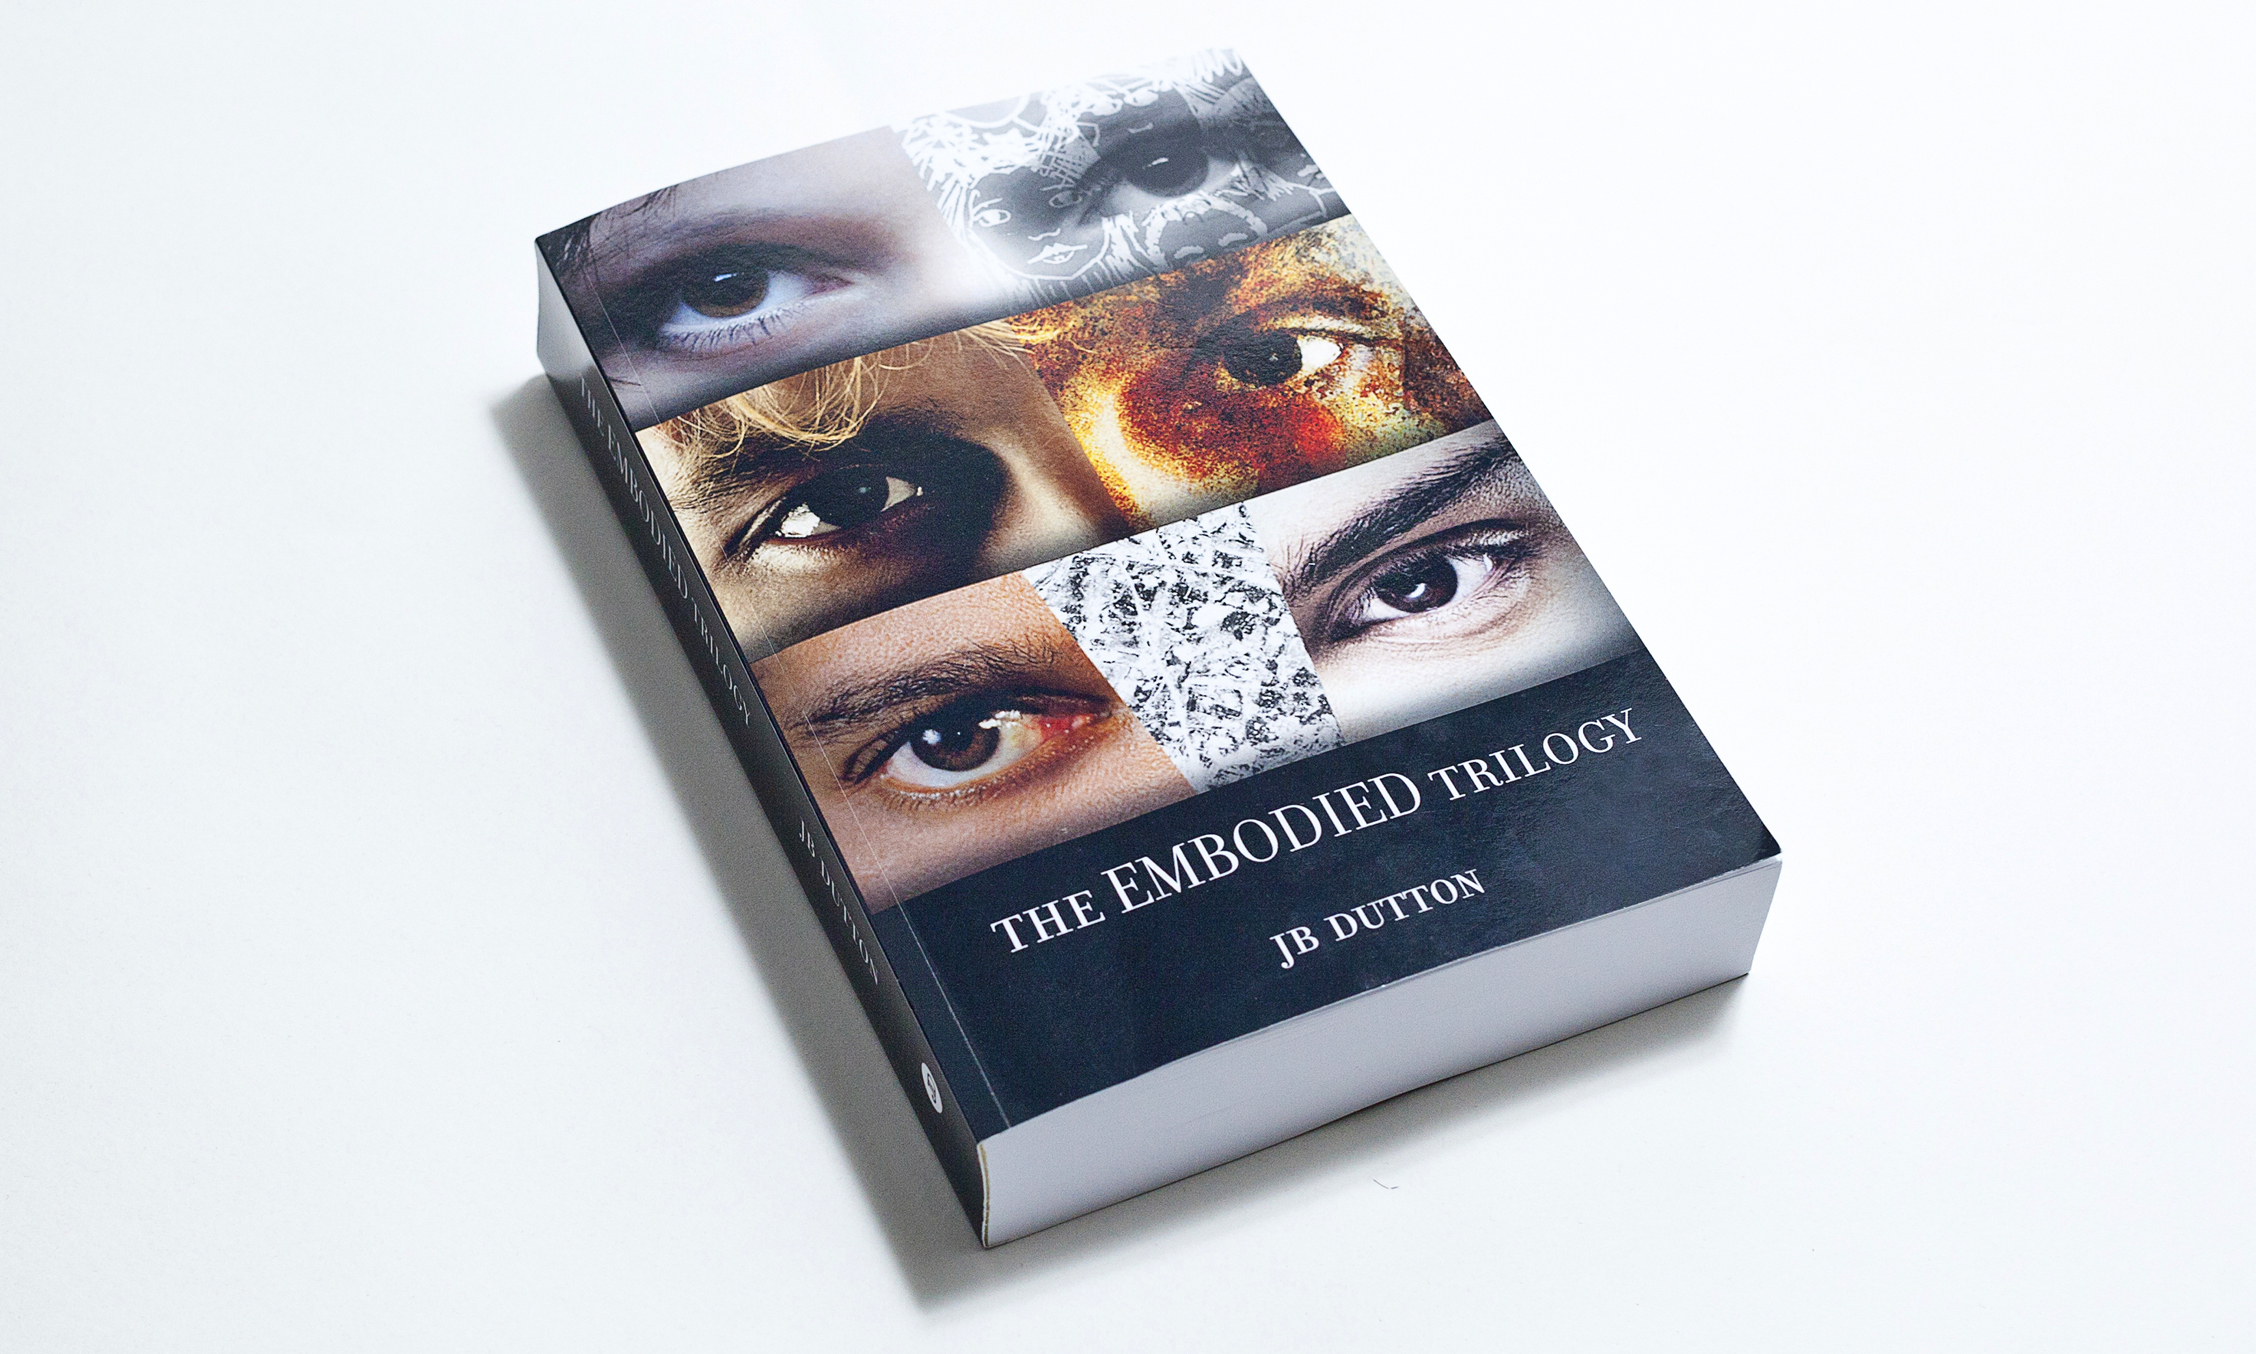 The Embodied Trilogy paperback edition